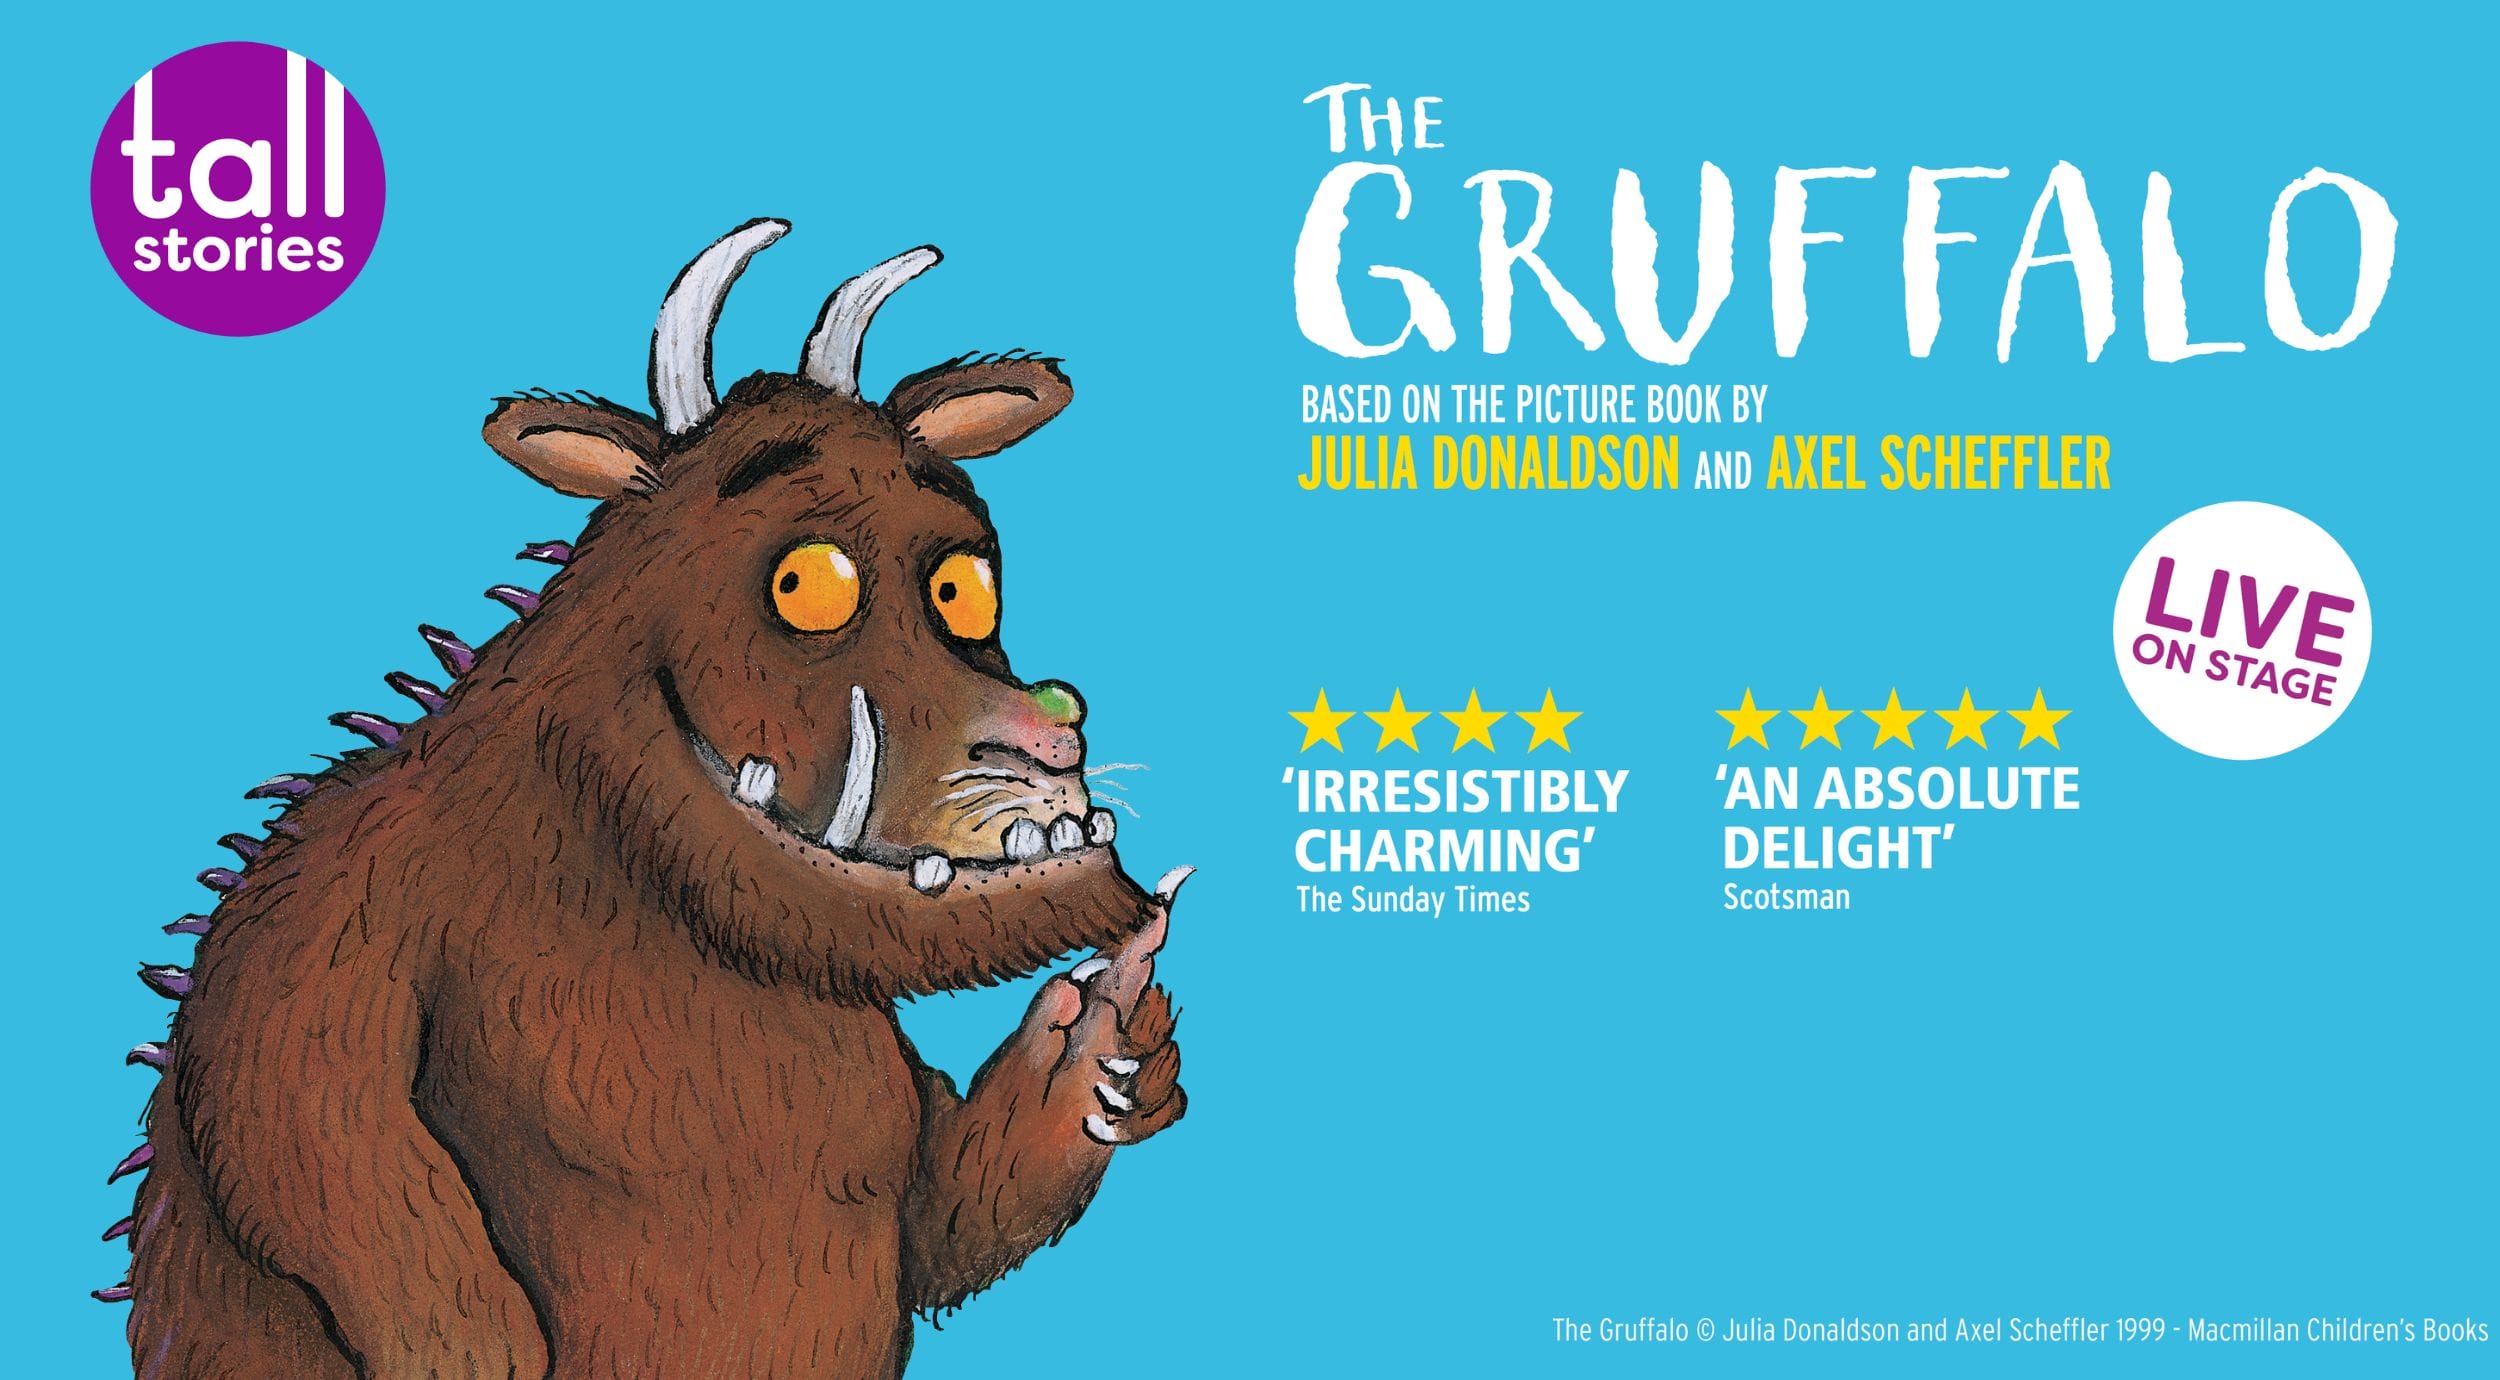 The iconic Gruffalo artwork is featured against a sky blue background. The Gruffalo is a big brown furry beast with grey horns, grey teeth, orange eyes and a green wart on his nose. The artwork features several five star reviews.